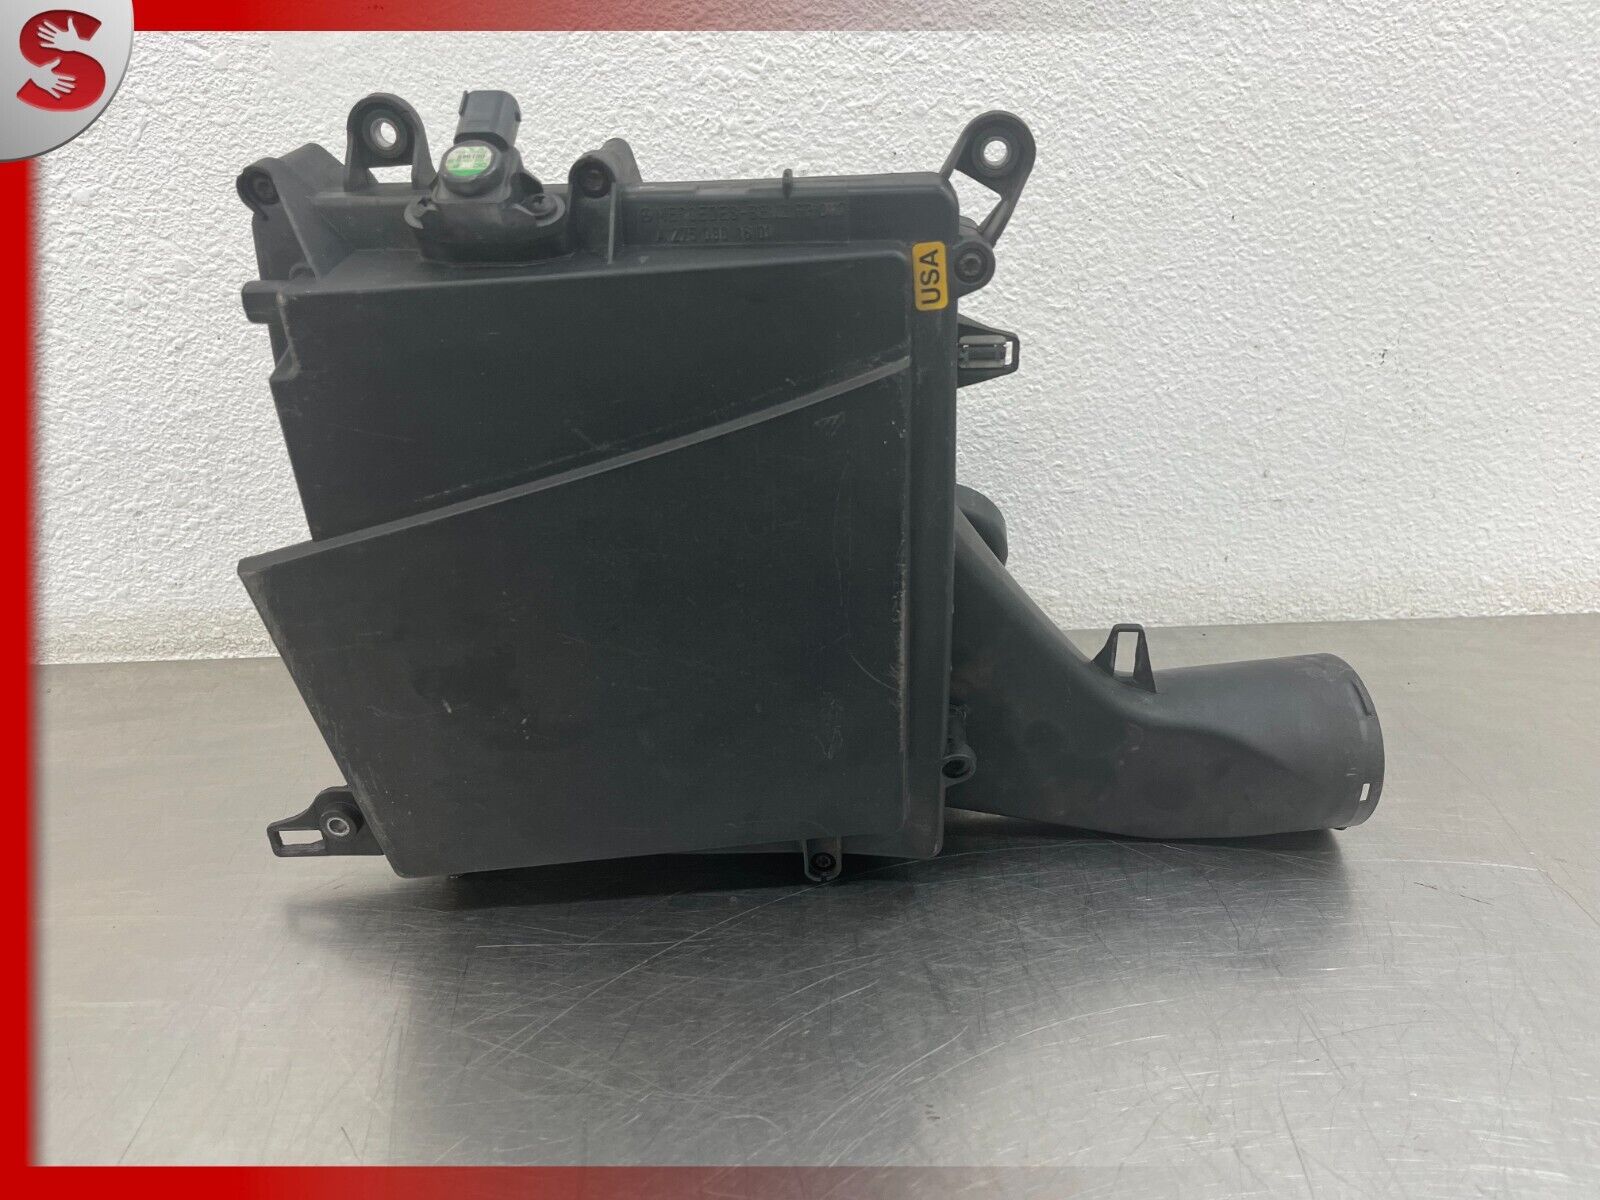 07-14 MERCEDES W216 CL600 S600 AIR INTAKE FILTER BOX RIGHT SIDE 2750901601 OEM